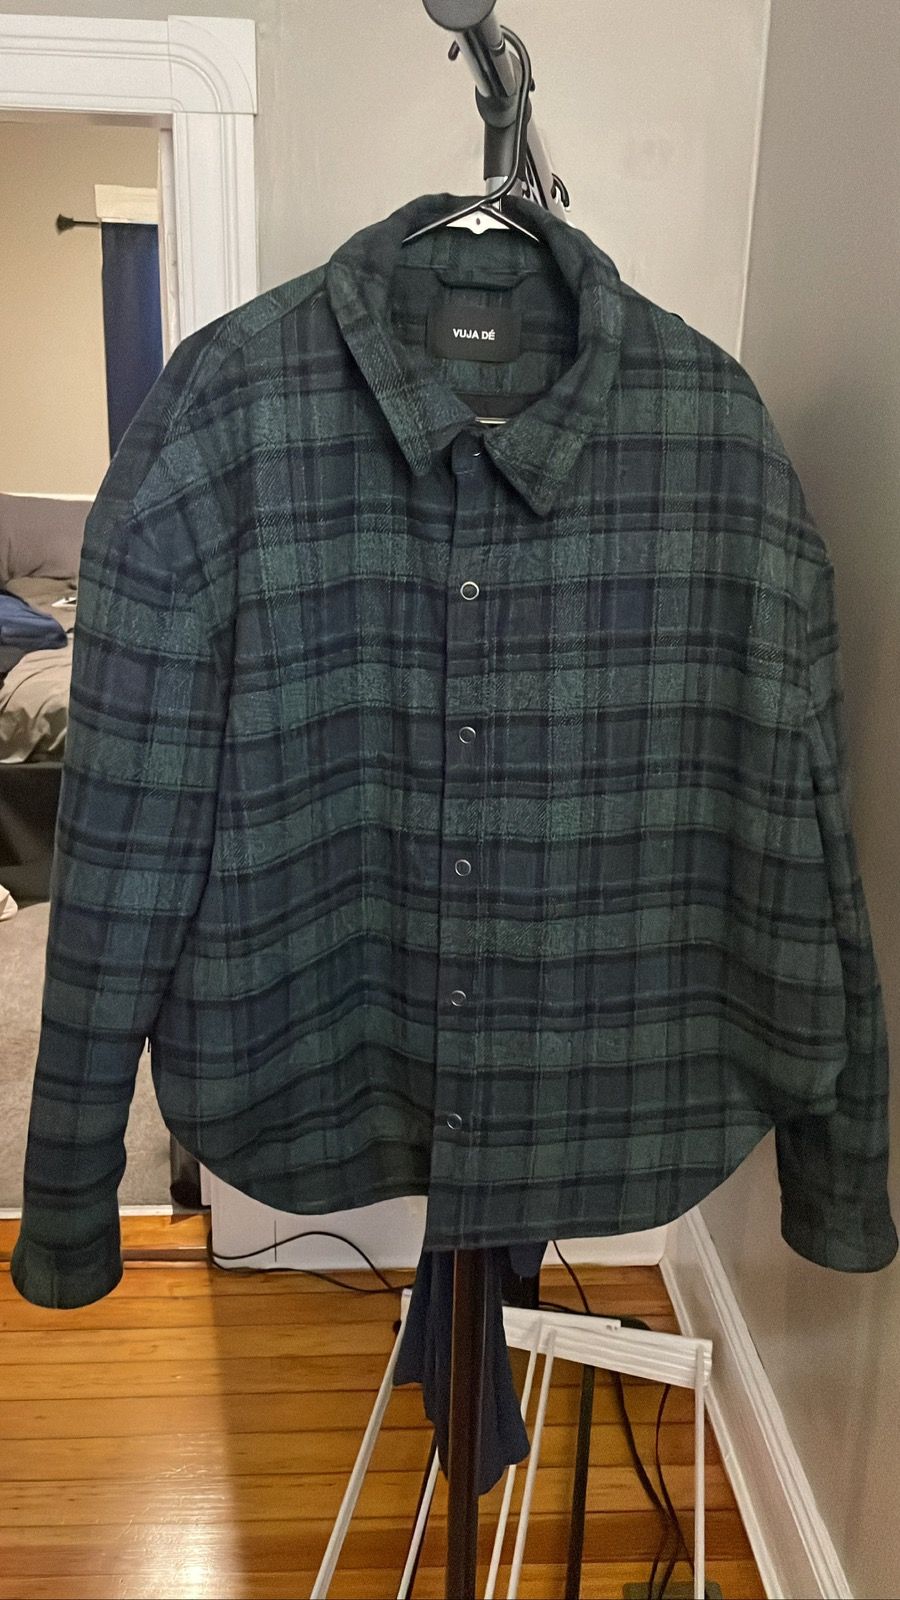 Vuja De Padded Flannel Jacket - Size 2 Sold Out | Grailed